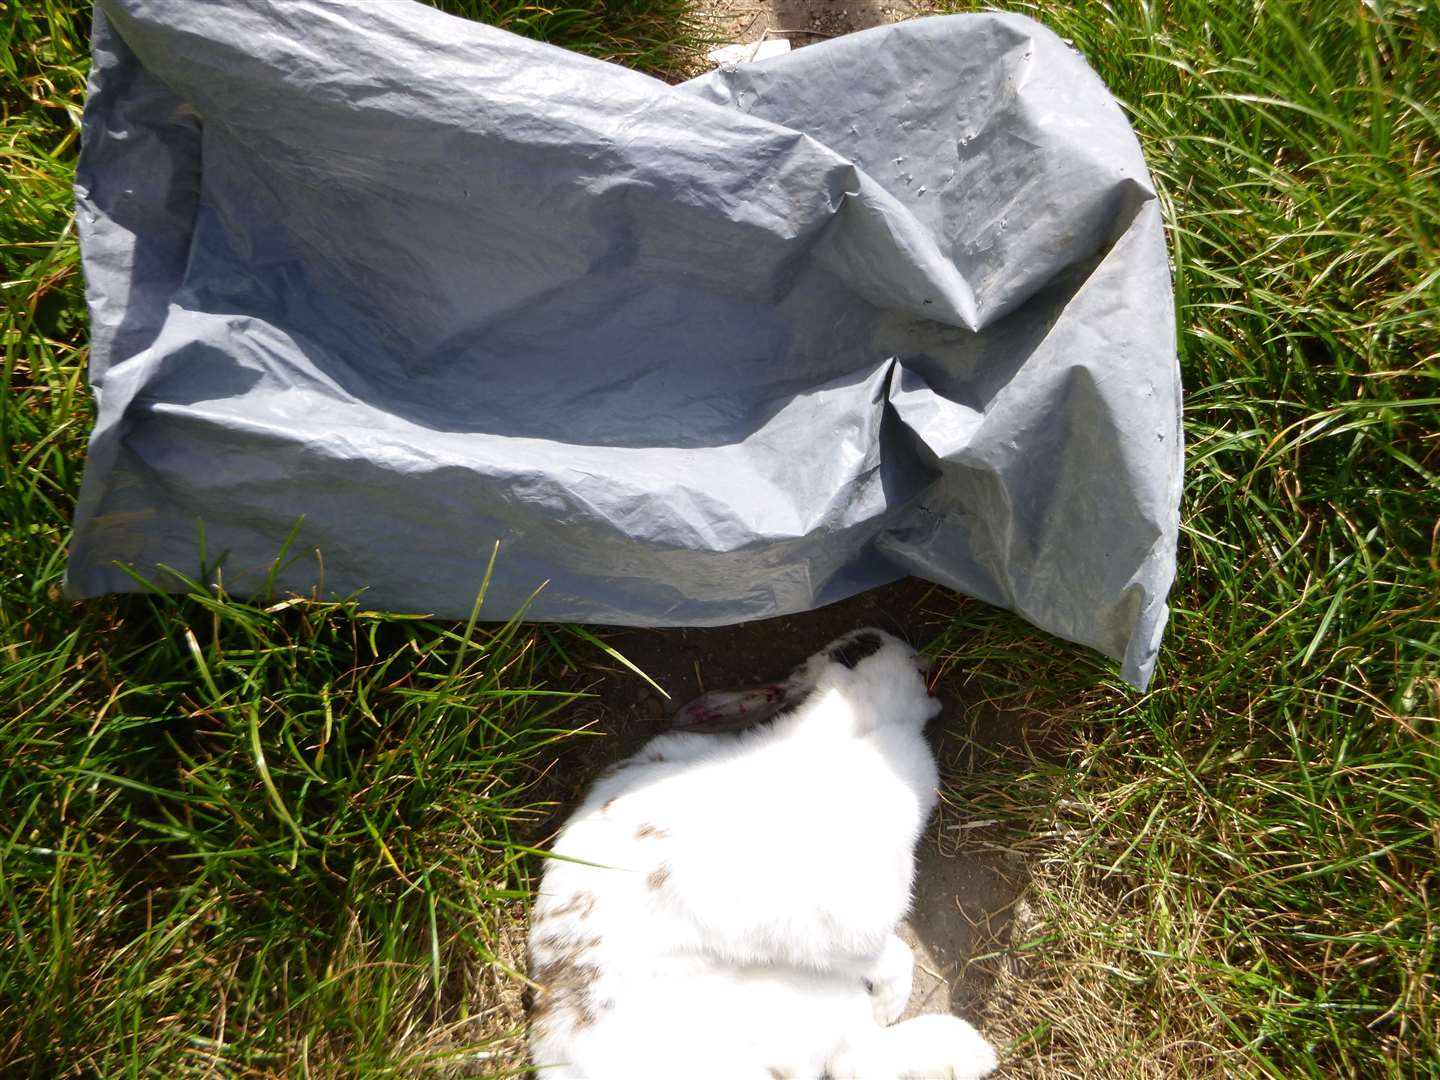 The bodies of a ferret and rabbit were found dumped on the verge in Wouldham. Picture: RSPCA